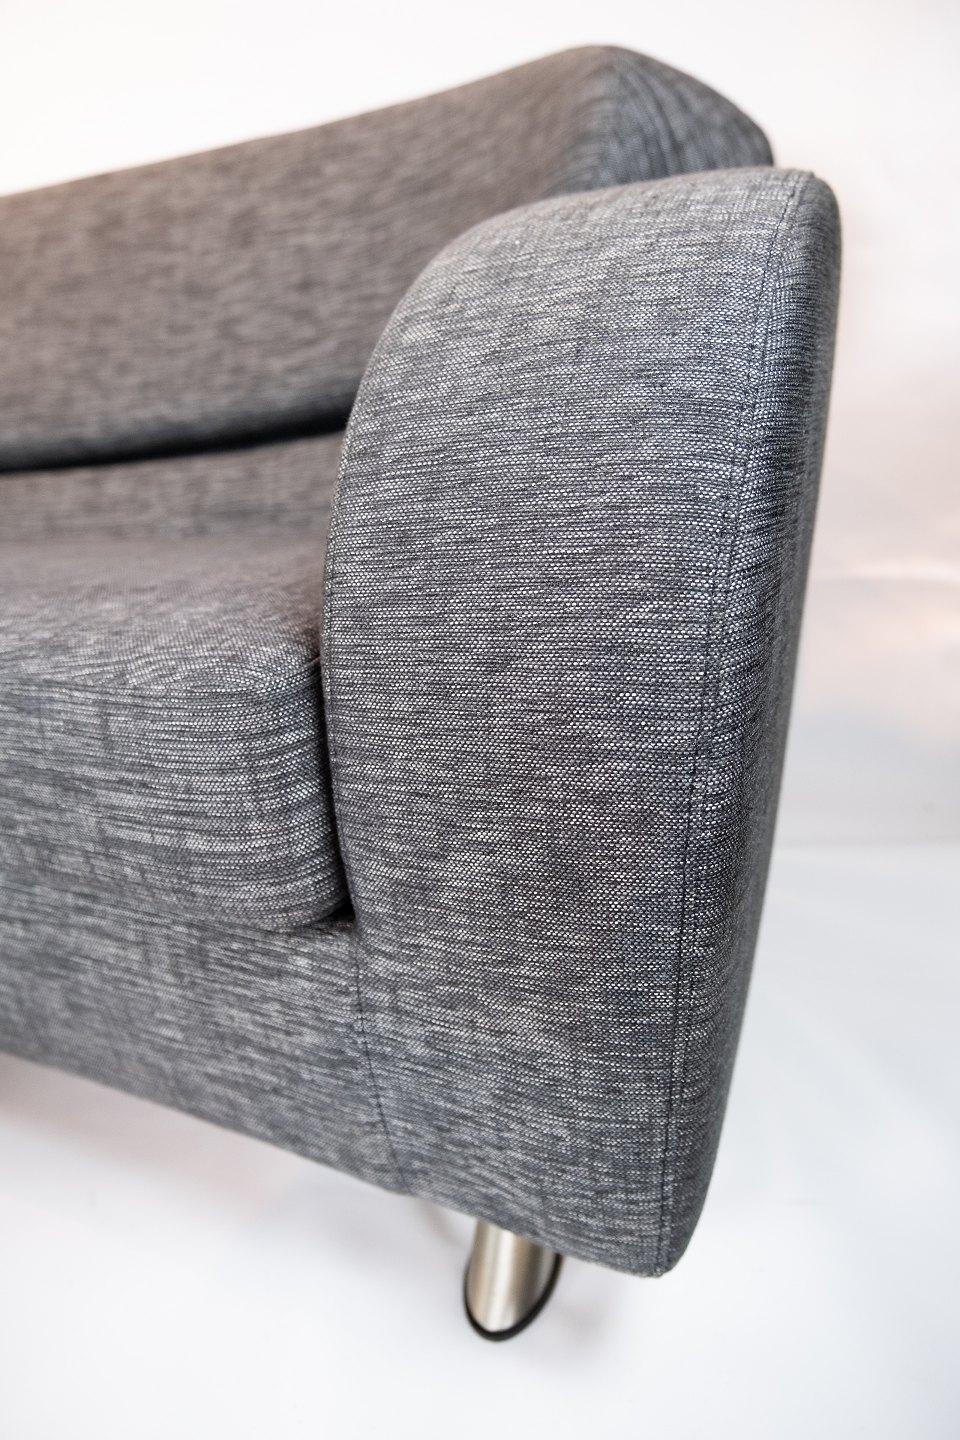 Late 20th Century Two-Seat Sofa of Grey Wool Fabric with Stool by the Norwegian Brand Brunstad